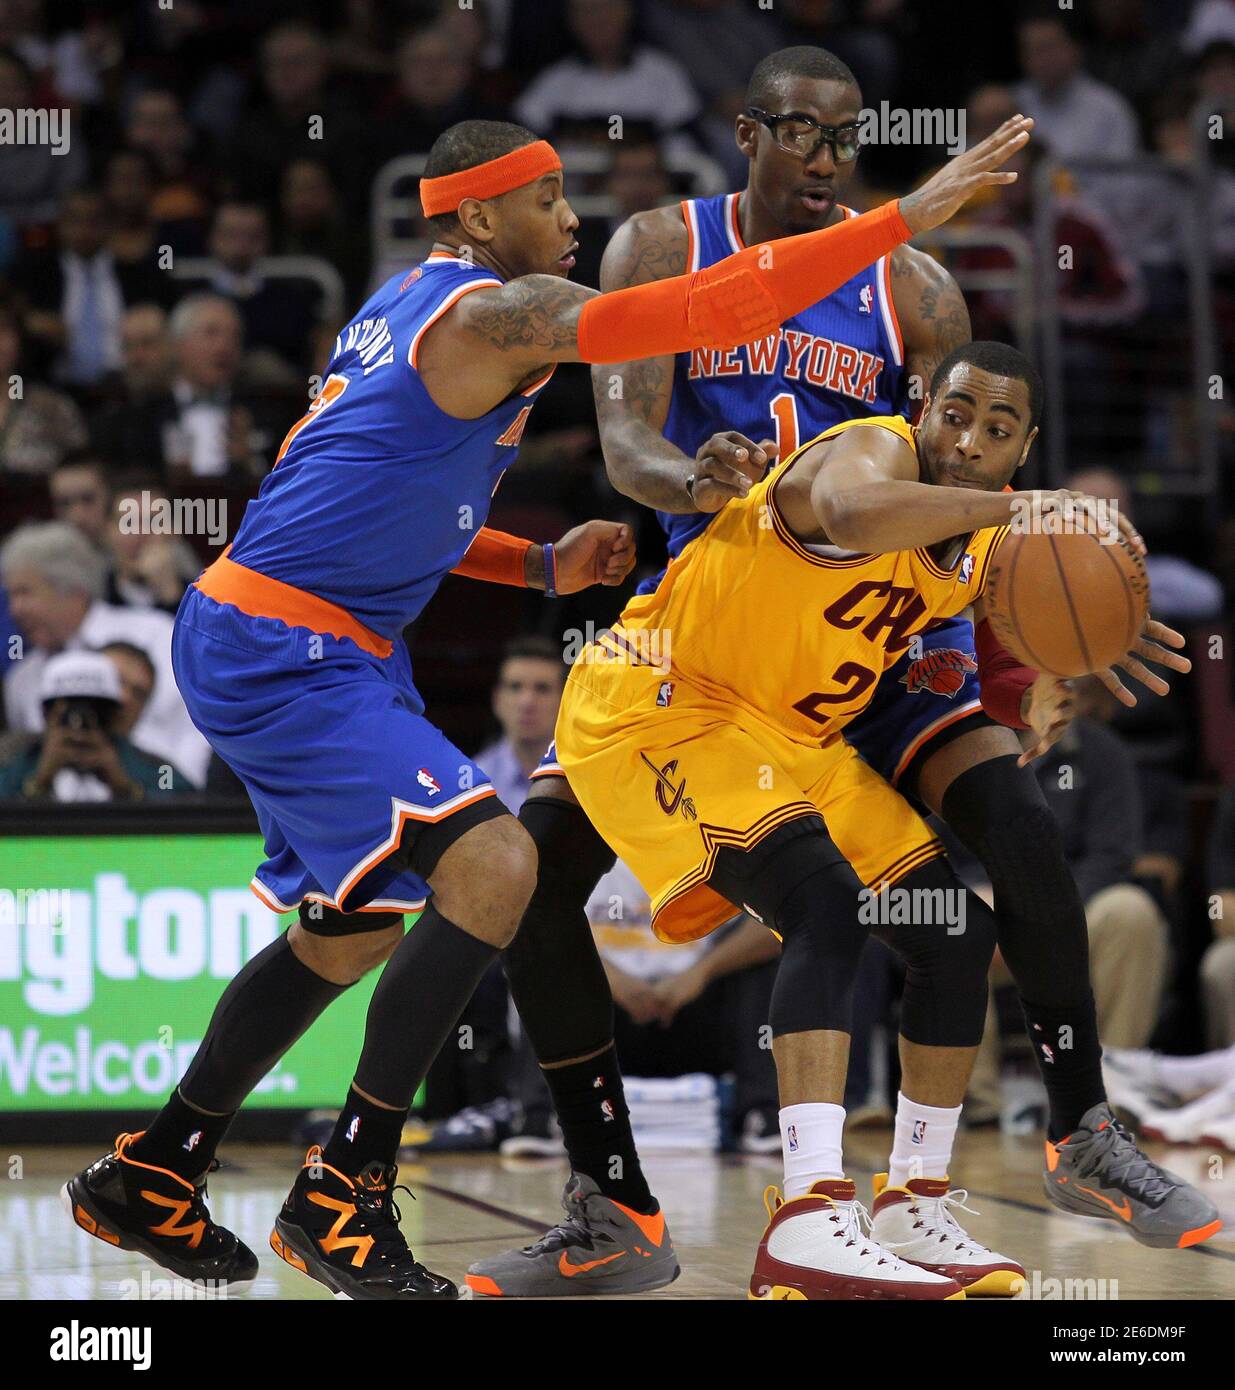 New York Knicks' Carmelo Anthony (L) and Amar'e Stoudemire (1) defend  Cleveland Cavaliers' Wayne Ellington (21) during the first quarter of their  NBA basketball game in Cleveland March 4, 2013. REUTERS/Aaron Josefczyk (